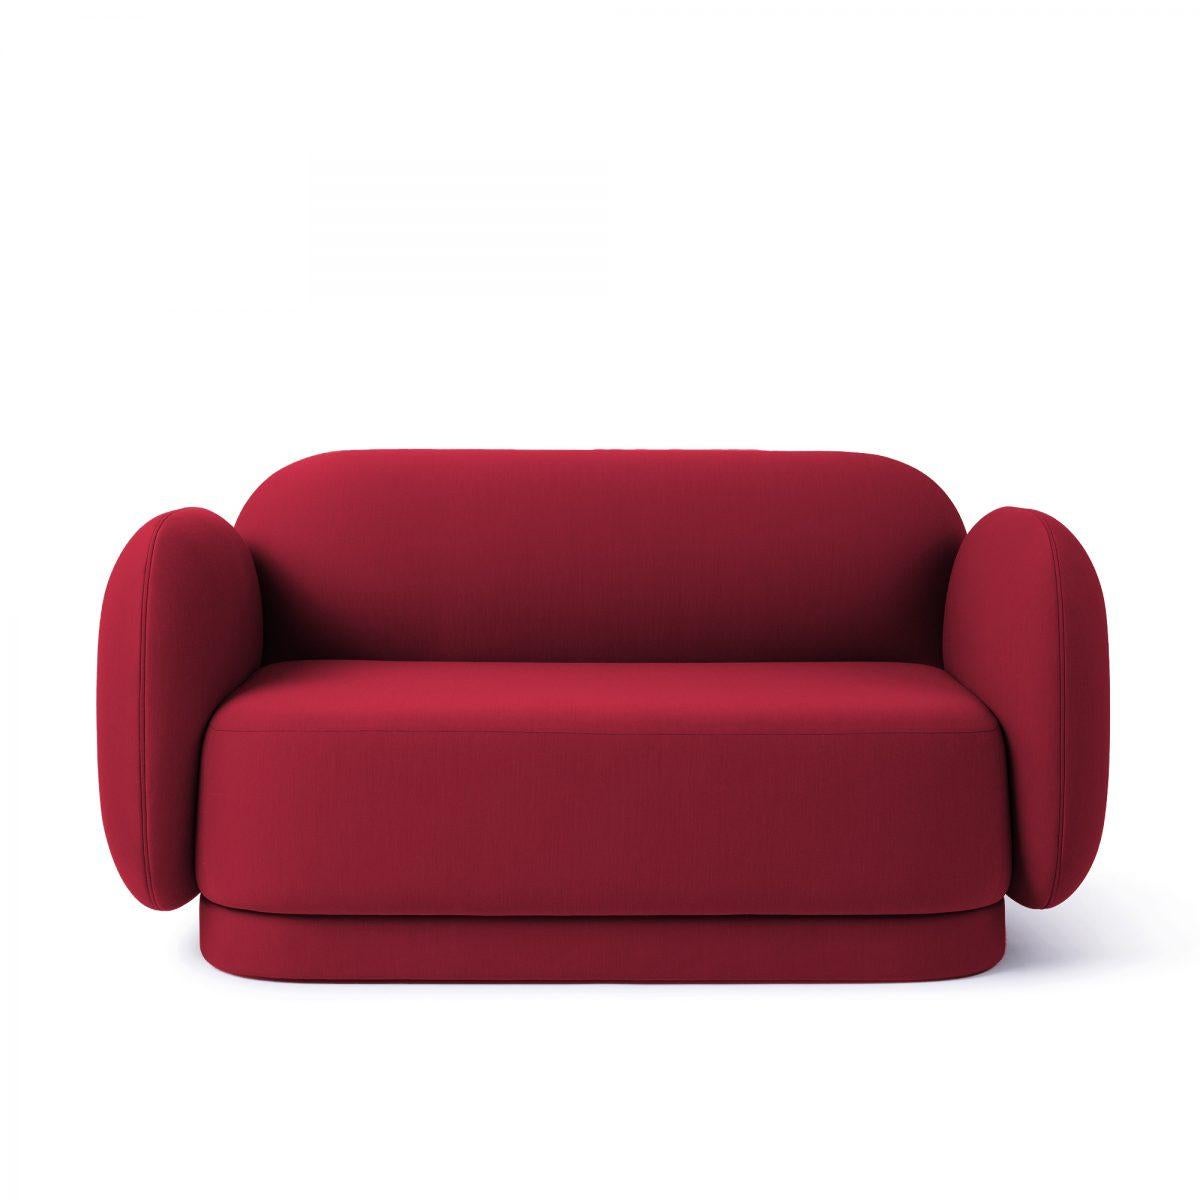 French Two Seater Major Tom Sofa Designed by Thomas Dariel